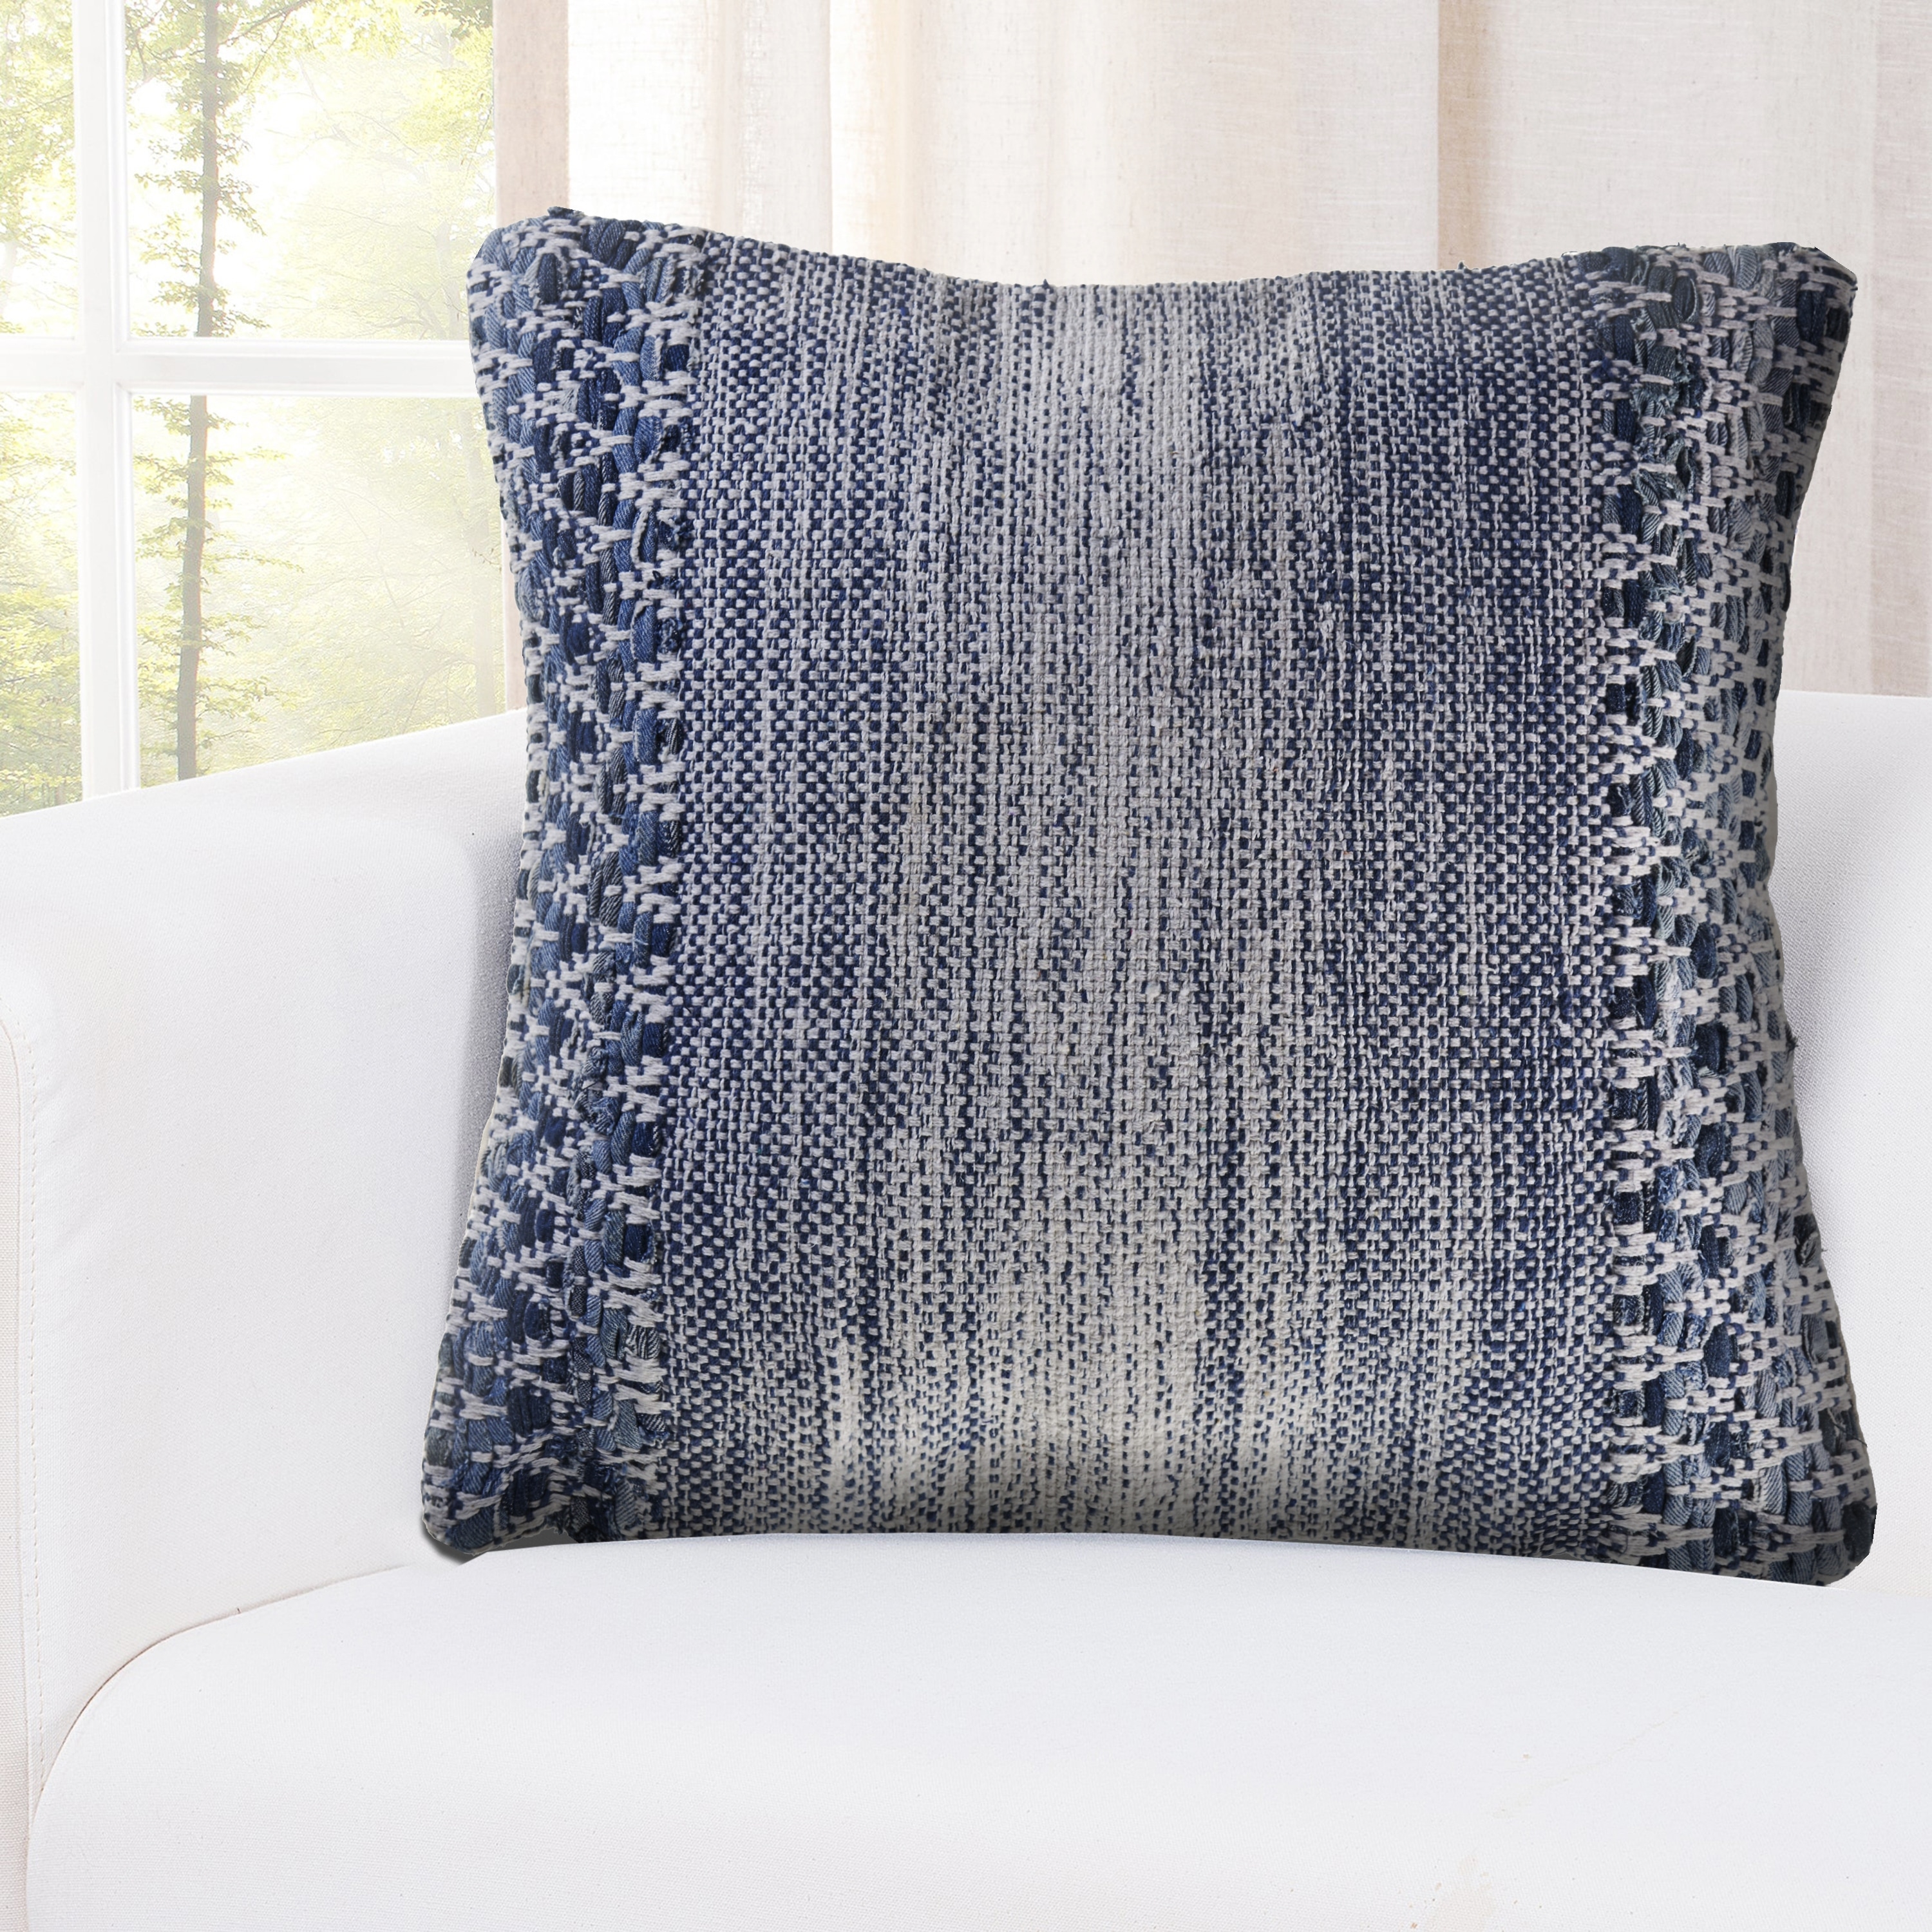 https://ak1.ostkcdn.com/images/products/is/images/direct/dc215cb8a86411abe234dc13760efae8557ecf61/Blue-and-Ivory-Textured-Throw-Pillow.jpg